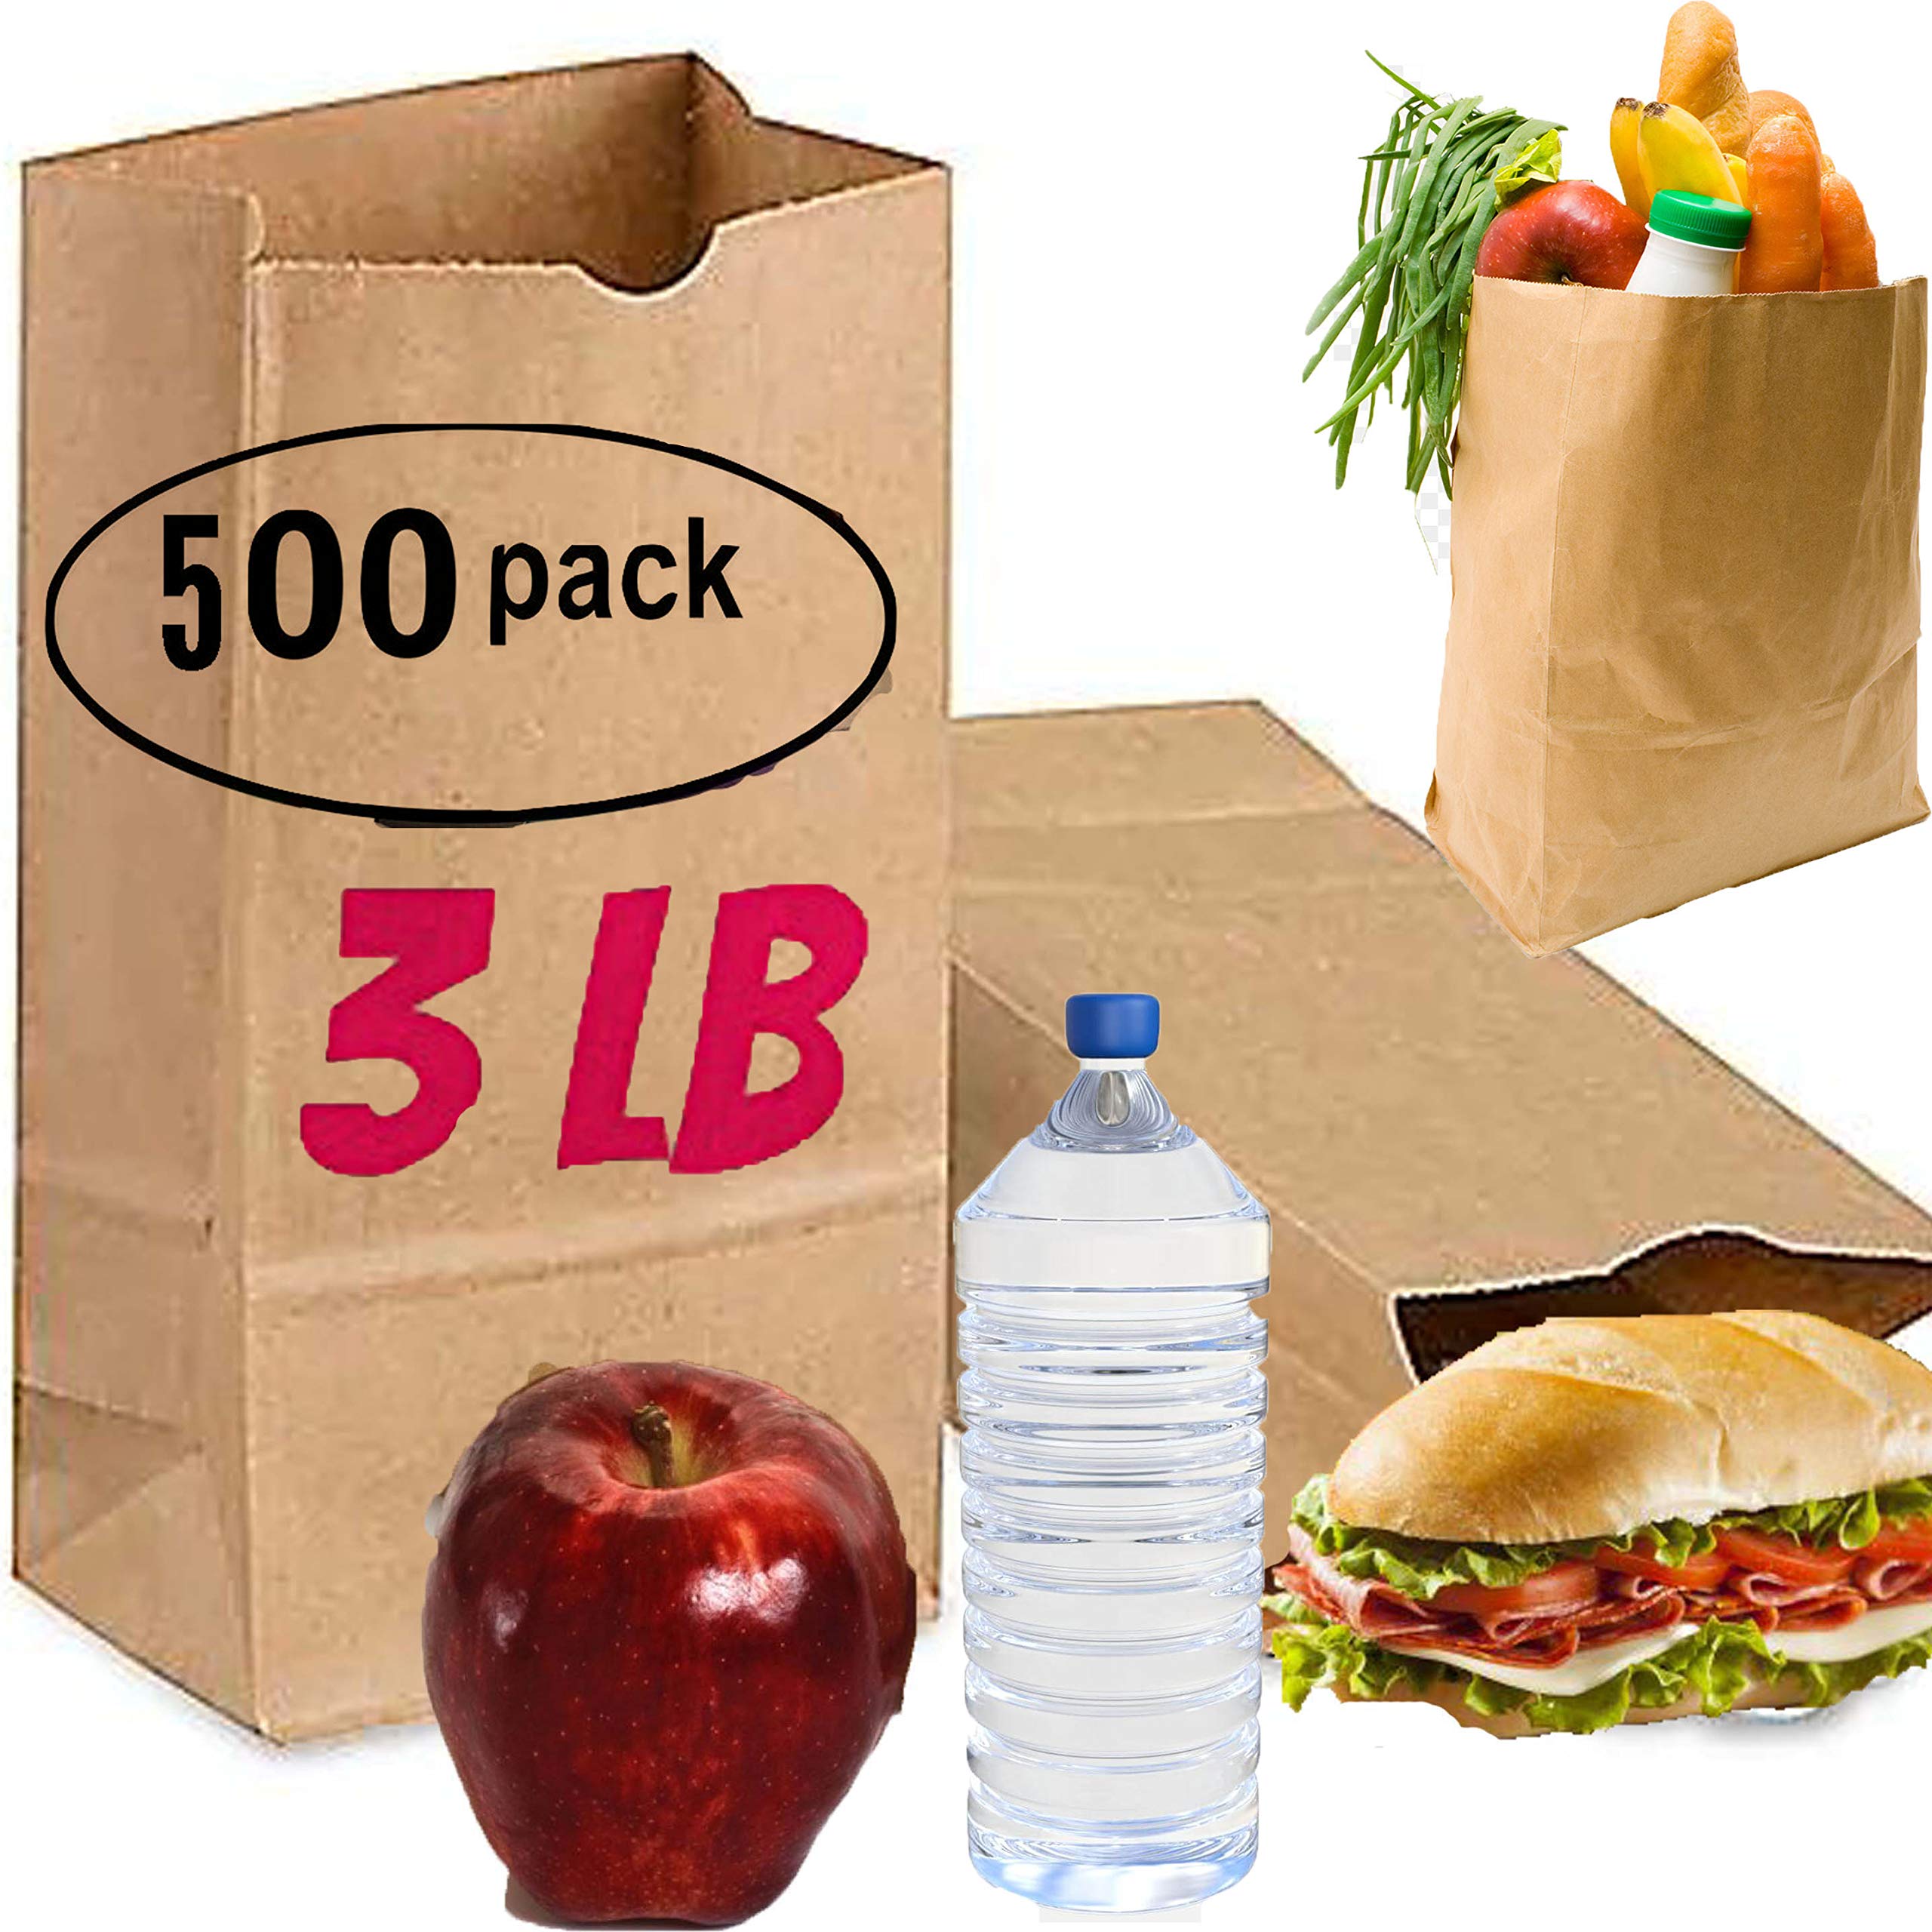 3 pound lunch bags 500 brown paper lunch bags 3 lb brown paper sacks lunch sandwich brown paper bags 3 Pound Lunch Bags, Party Bags Pack of 500 brown lunch bags bulk brown